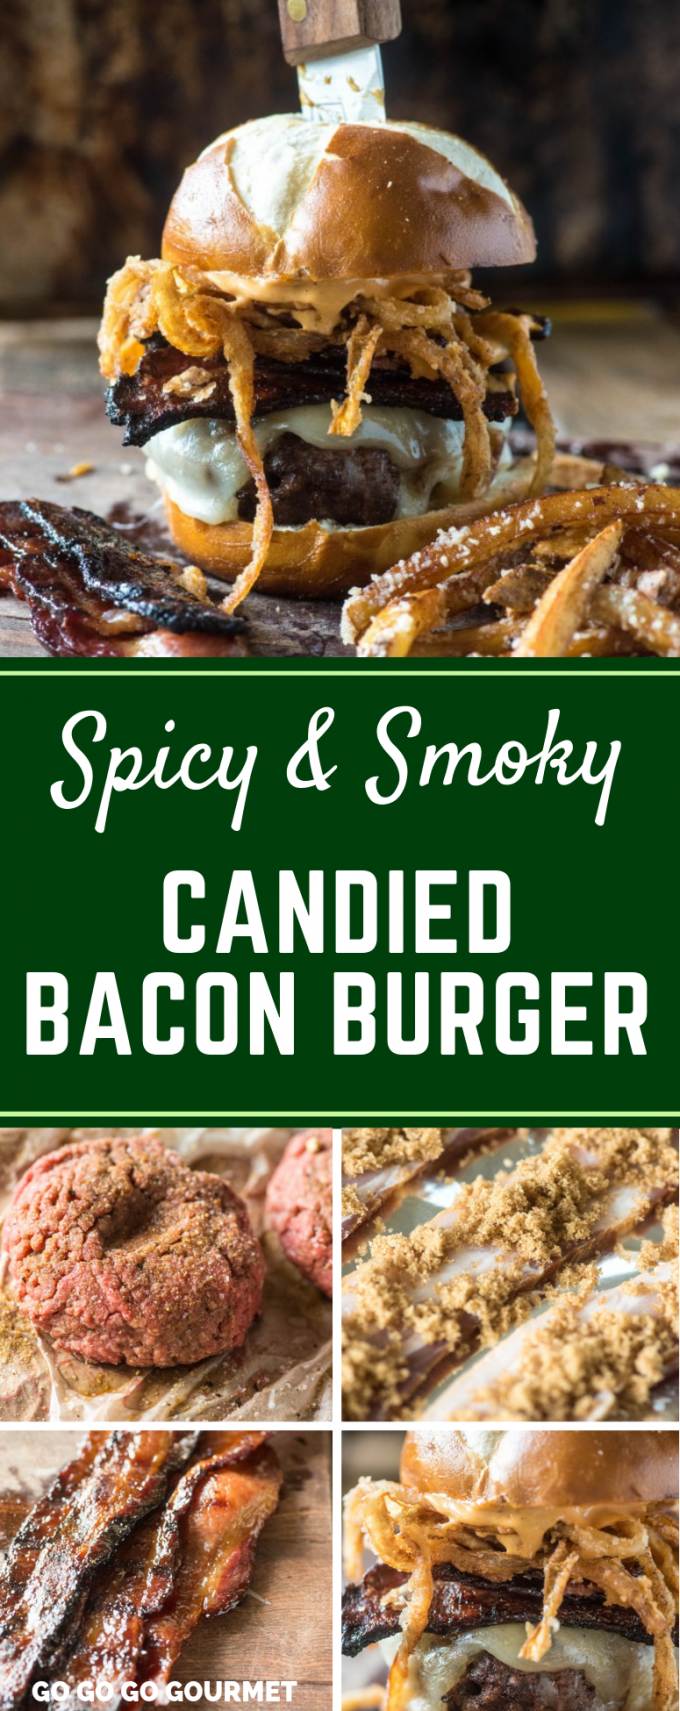 This Spicy and Smoky Candied Bacon Burger is one of the best cheeseburger recipes! With juicy burger patties, melty cheese and crispy onion straws, this is a burger that can't be beat! #gogogogourmet #spicysmokycandiedbaconburger #baconburger #candiedbacon  via @gogogogourmet